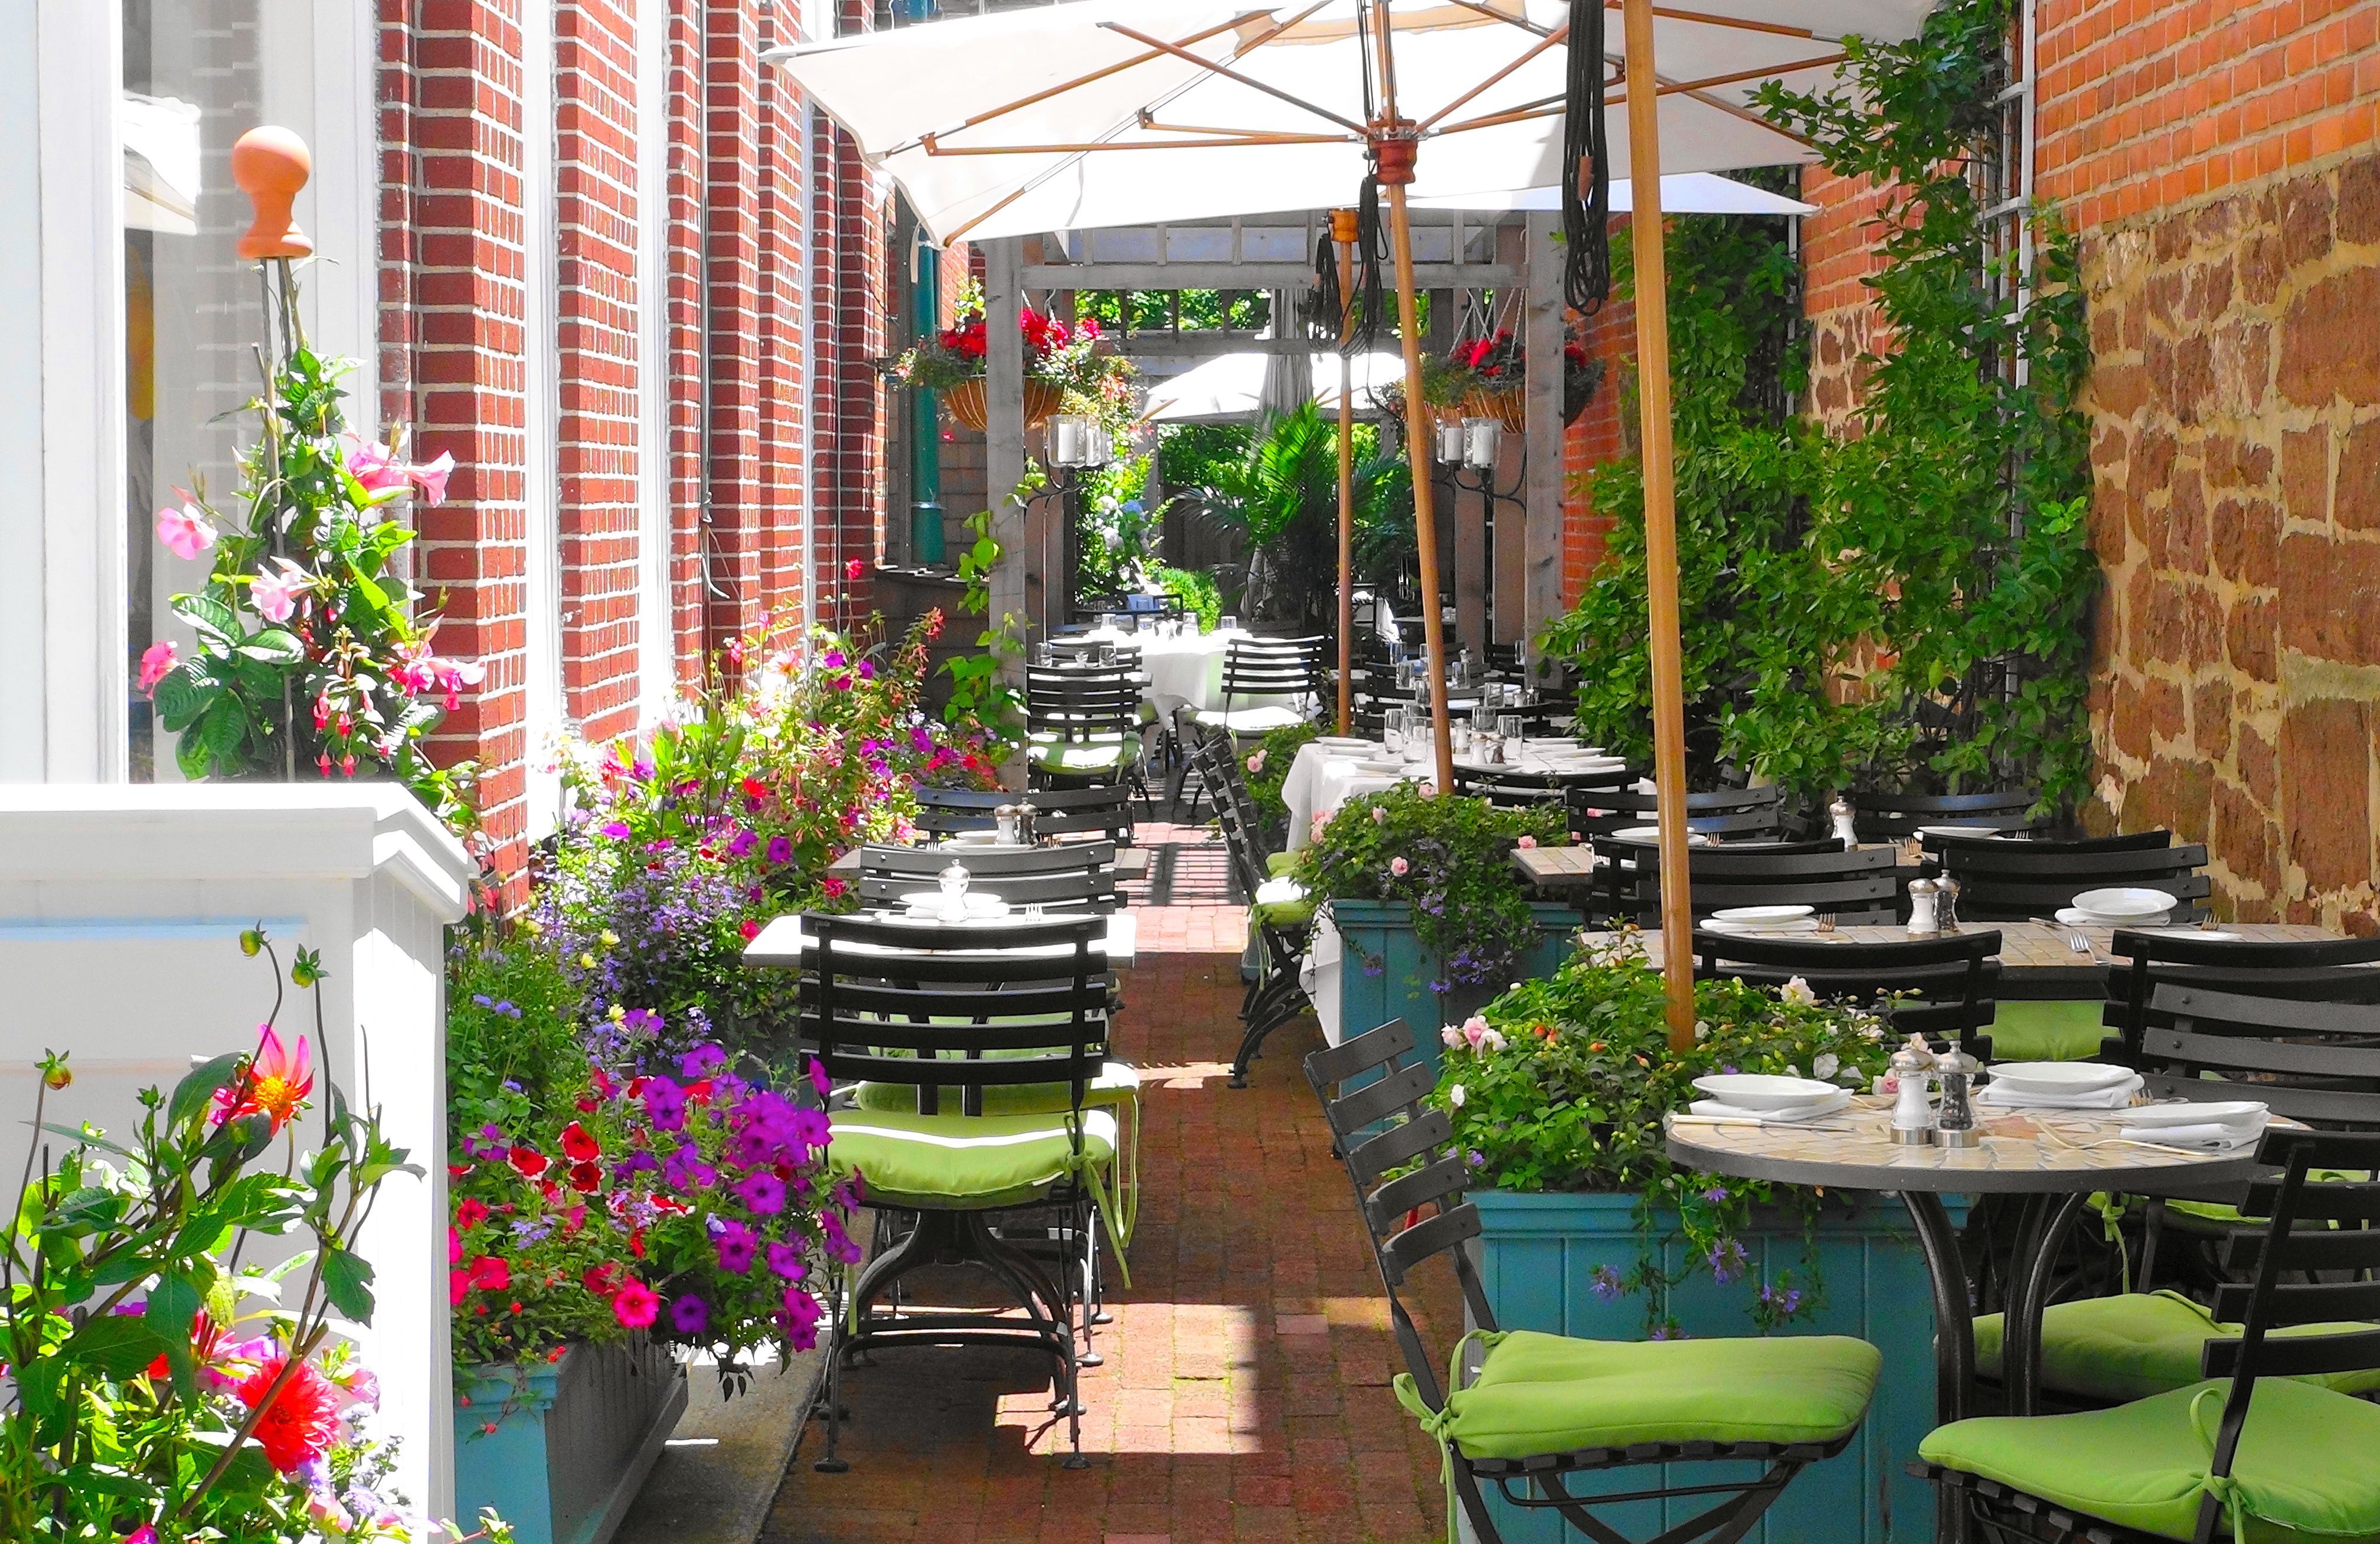 SoMa closes outdoor dining for winter